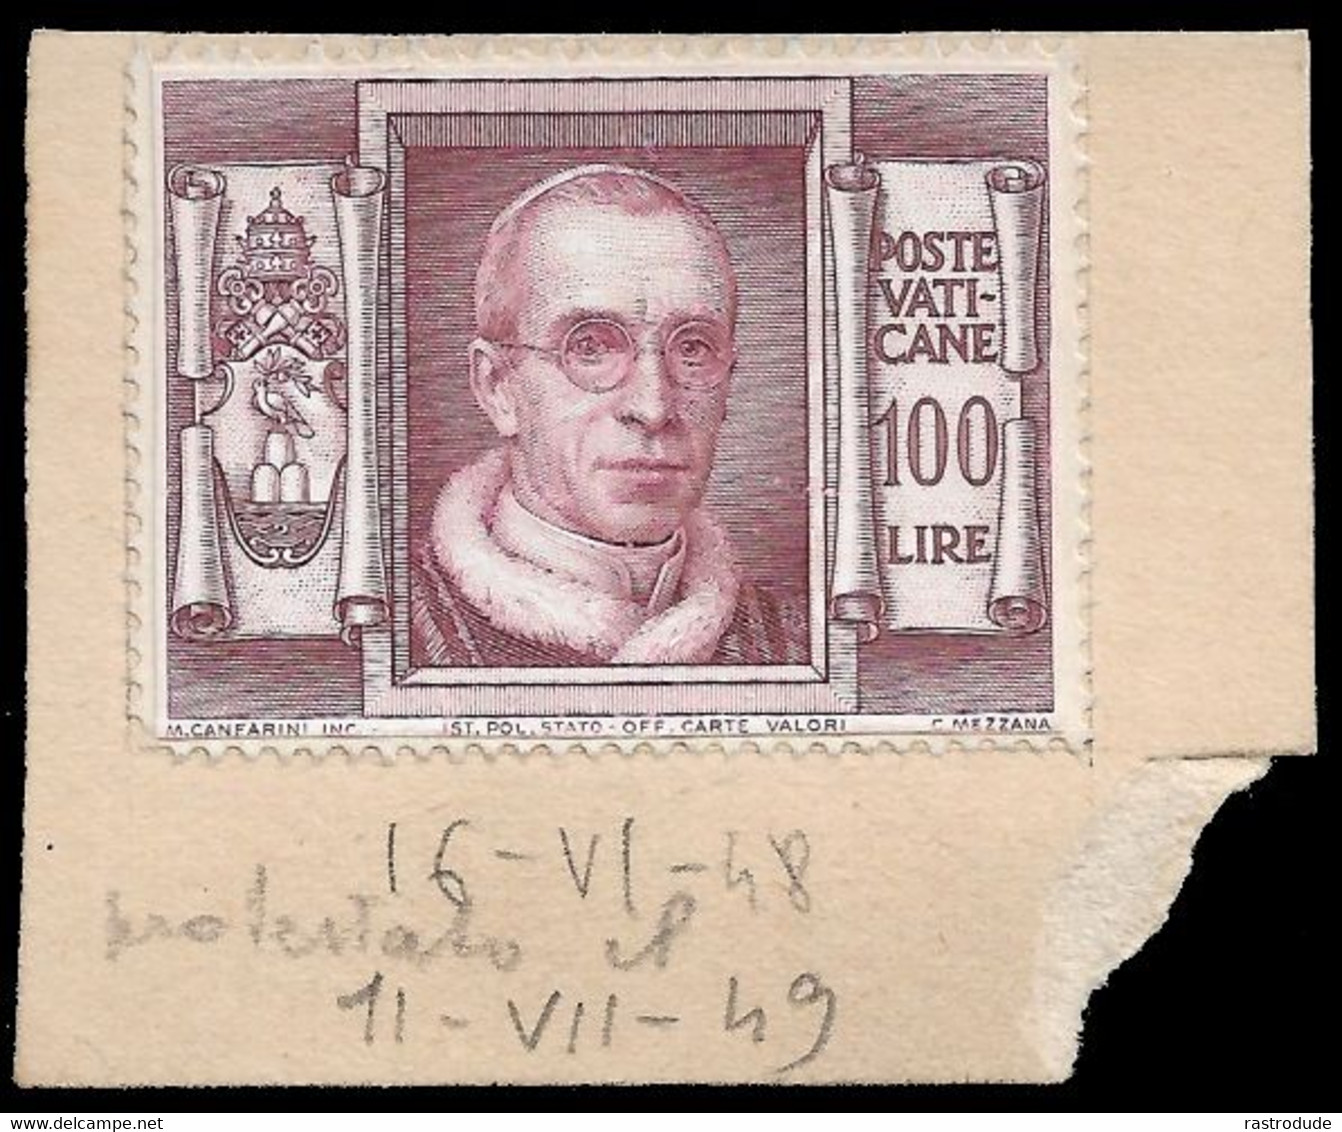 VATICAN CITY - 1948 VERY RARE PROOF / PROVE 100L (Sassone 131) NOT ISSUED COLOR - POPE PIUS XII - Ongebruikt